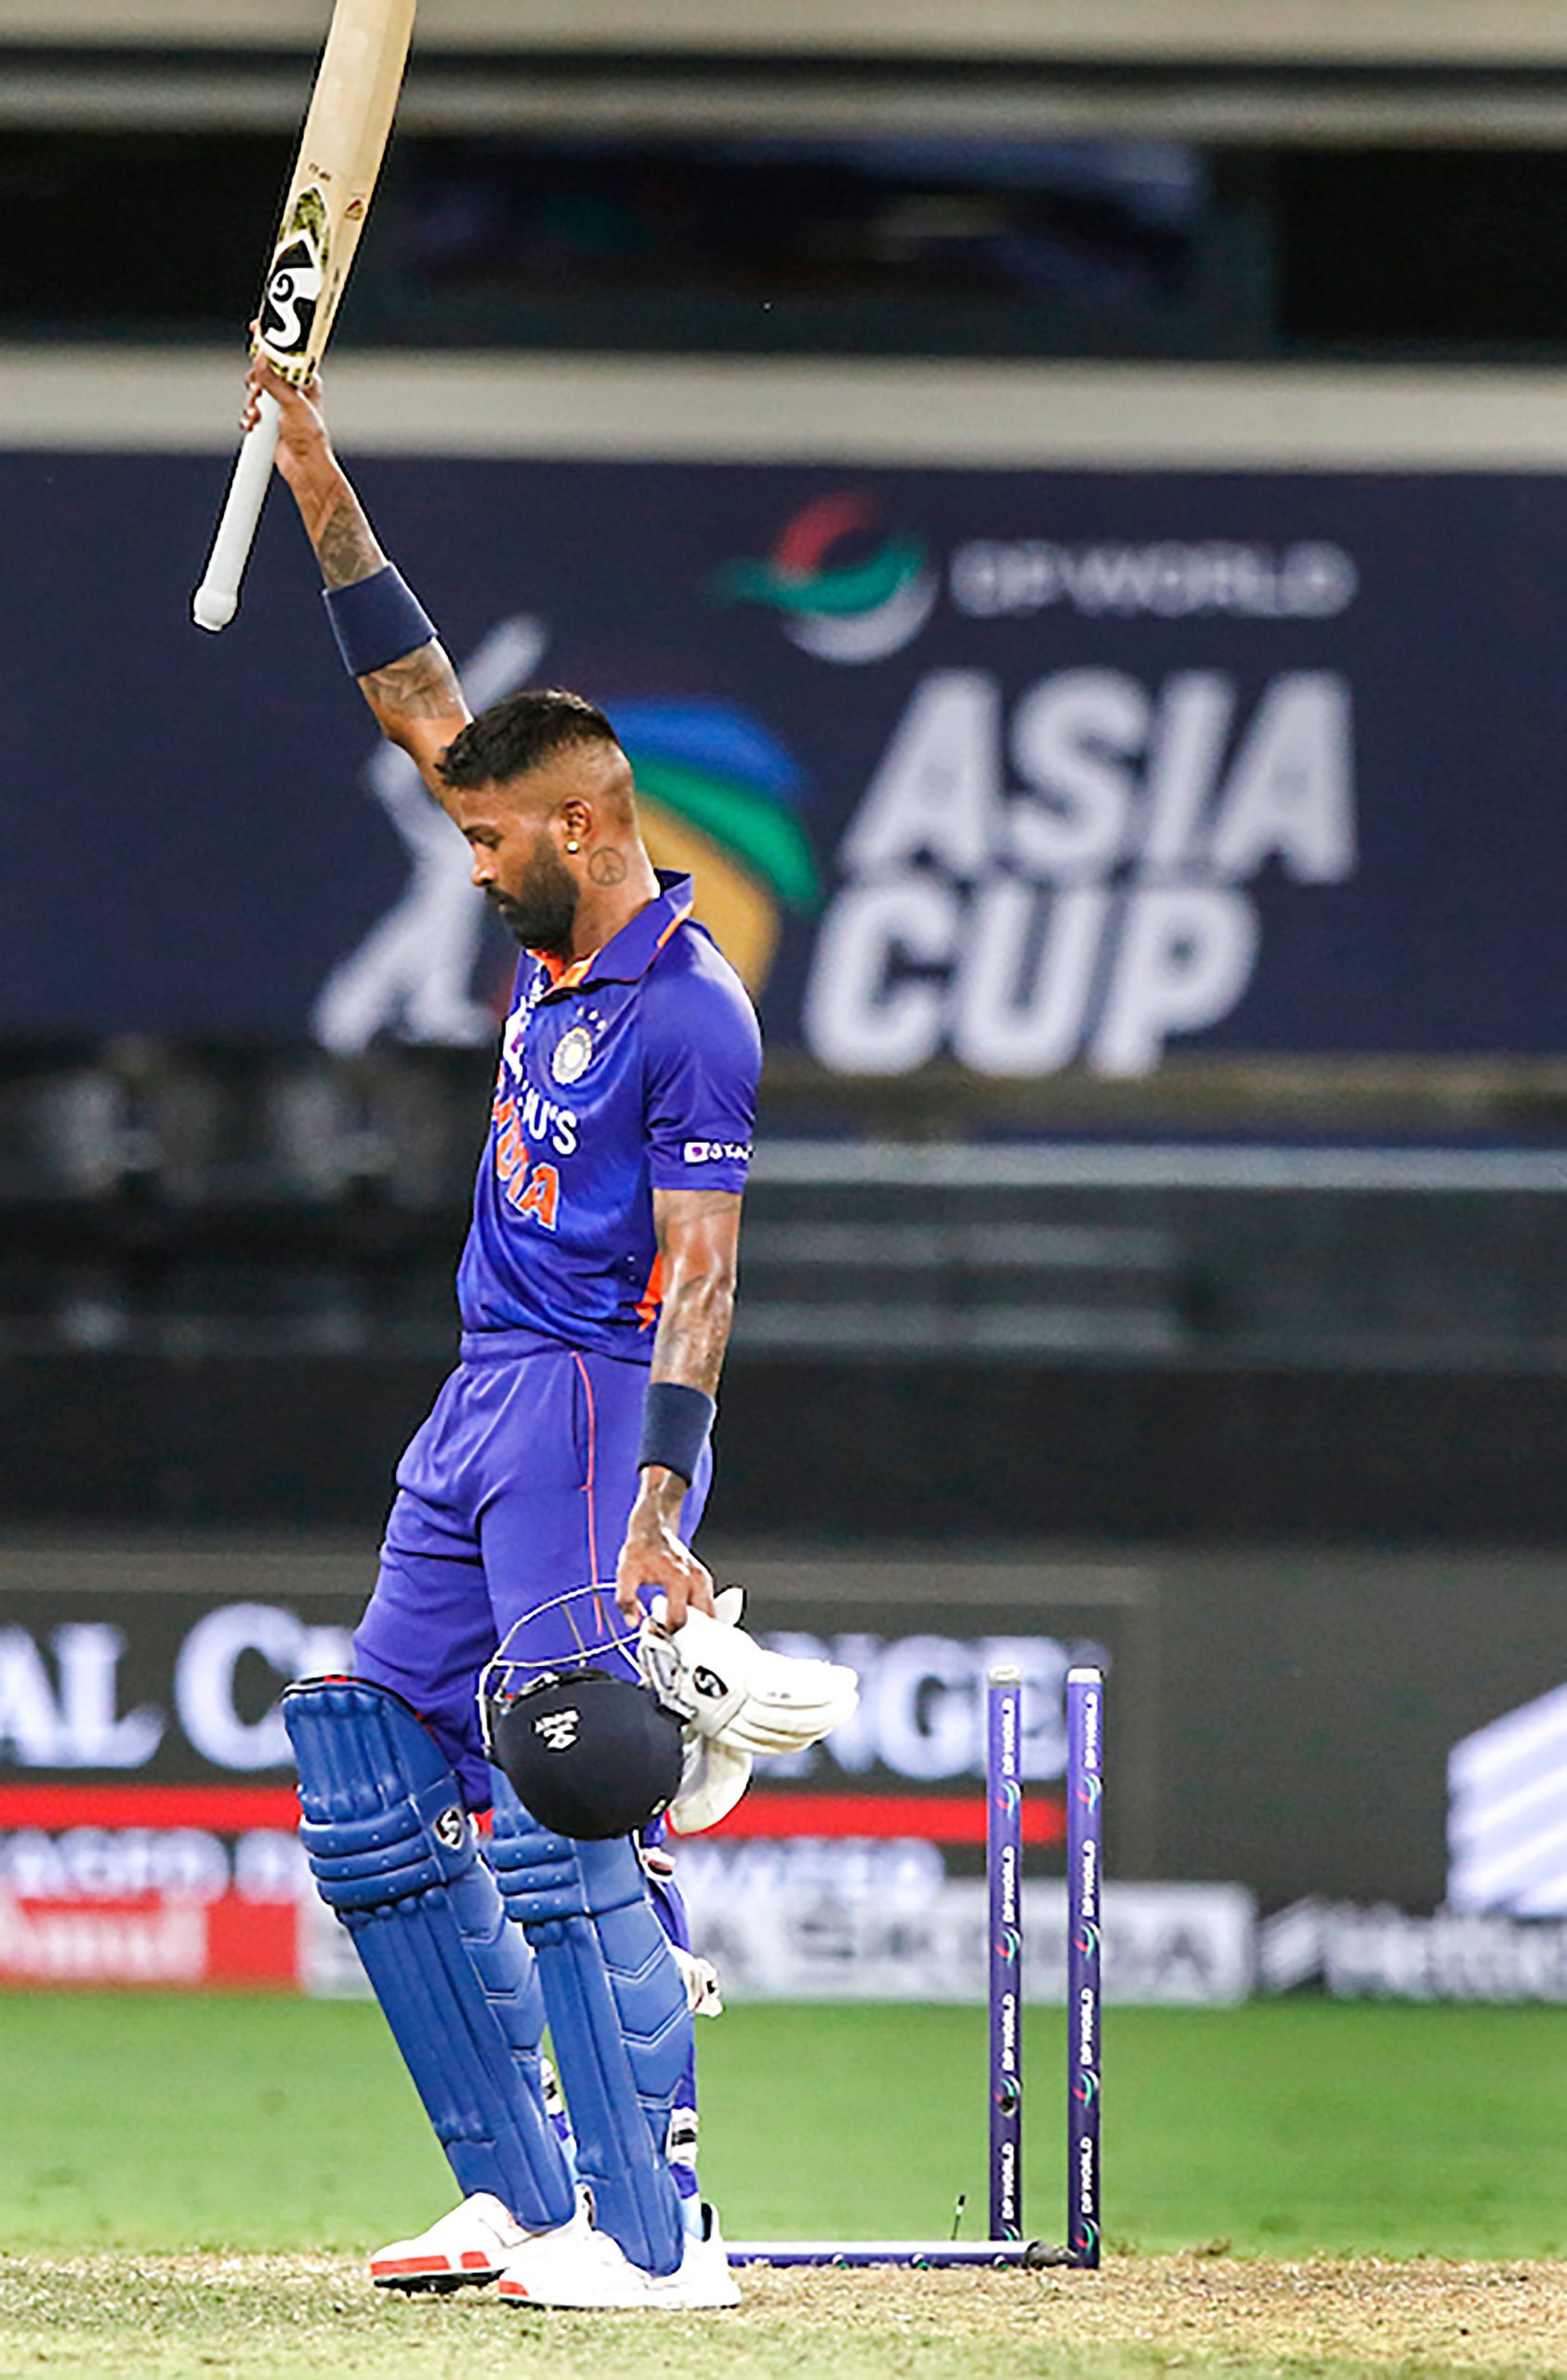 Watch: India’s winning moment vs Pakistan at Asia Cup 2022